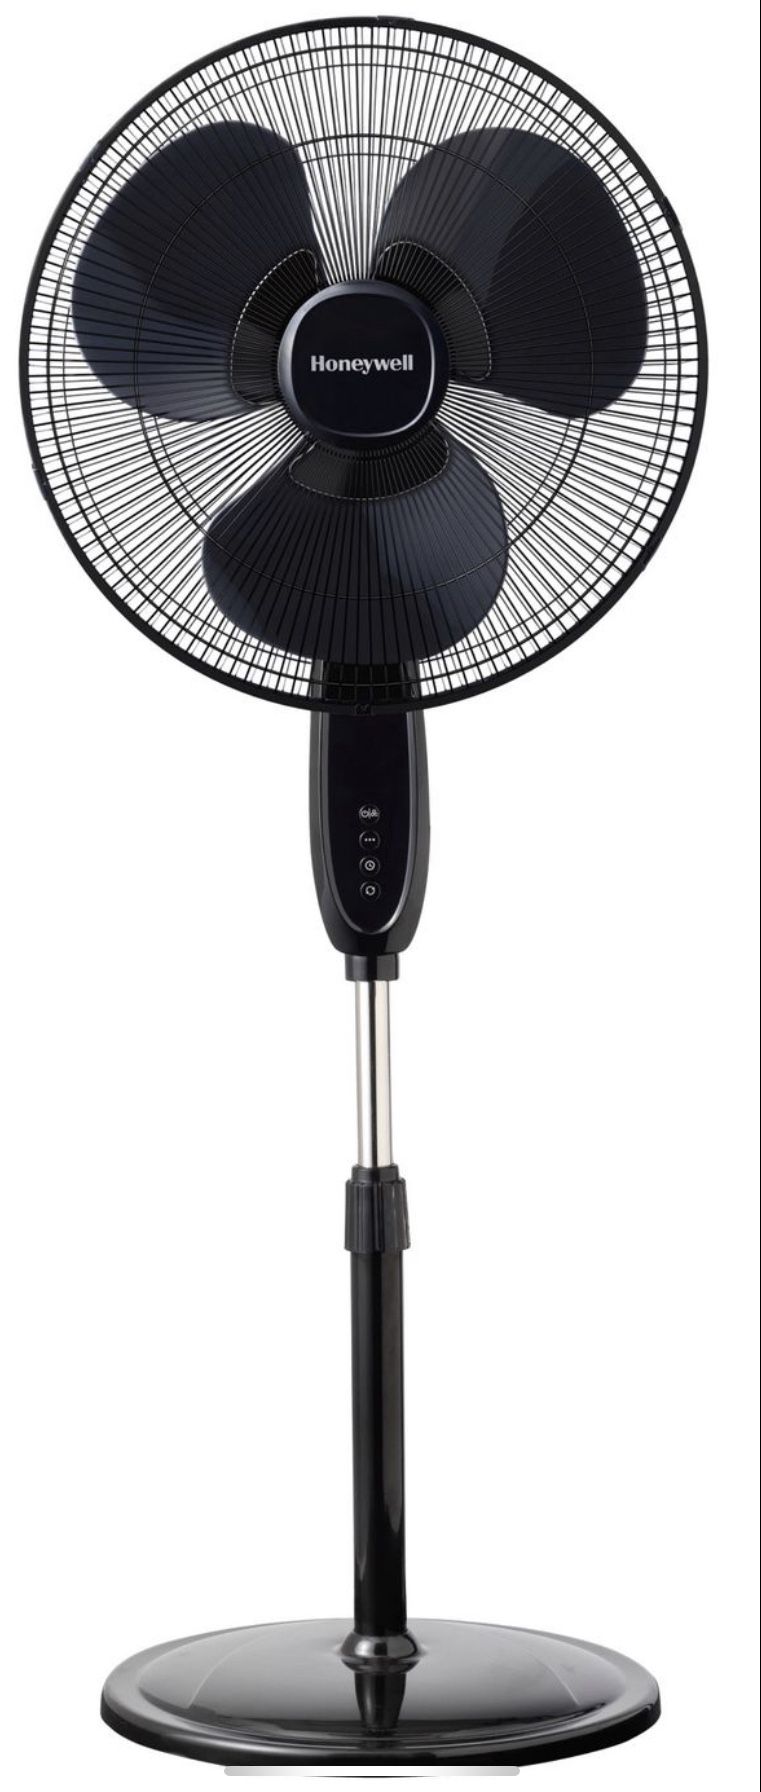 Brand New! Honeywell 16” Oscillating Stand Fan! Double Bladed!